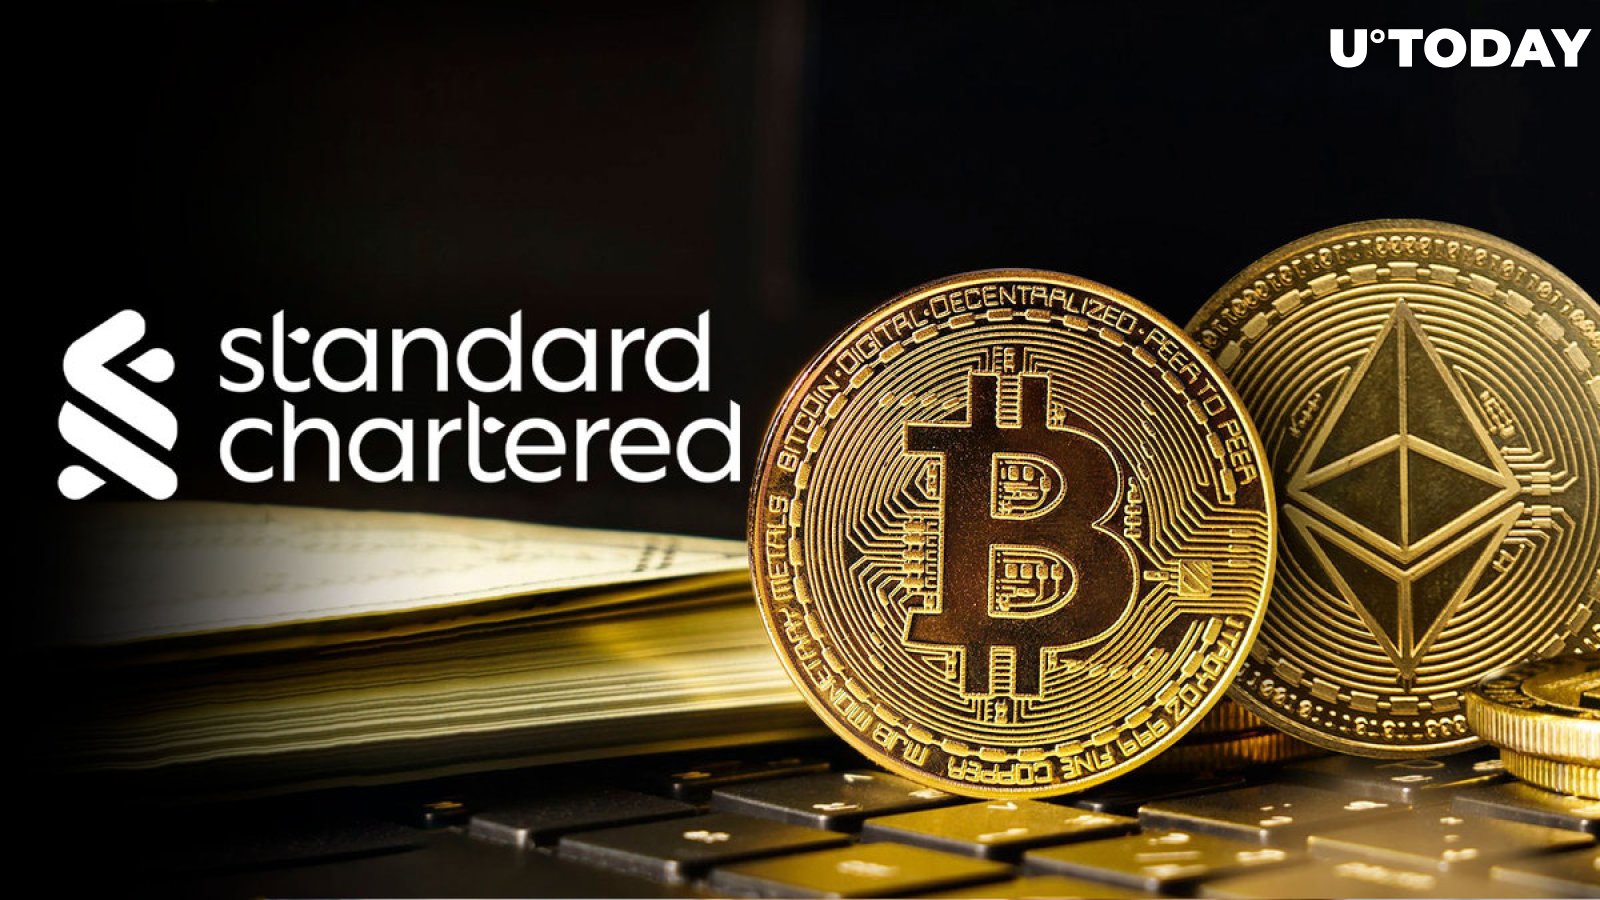 Banking Giant Standard Chartered to Launch Bitcoin, Ethereum Trading Desk: Details